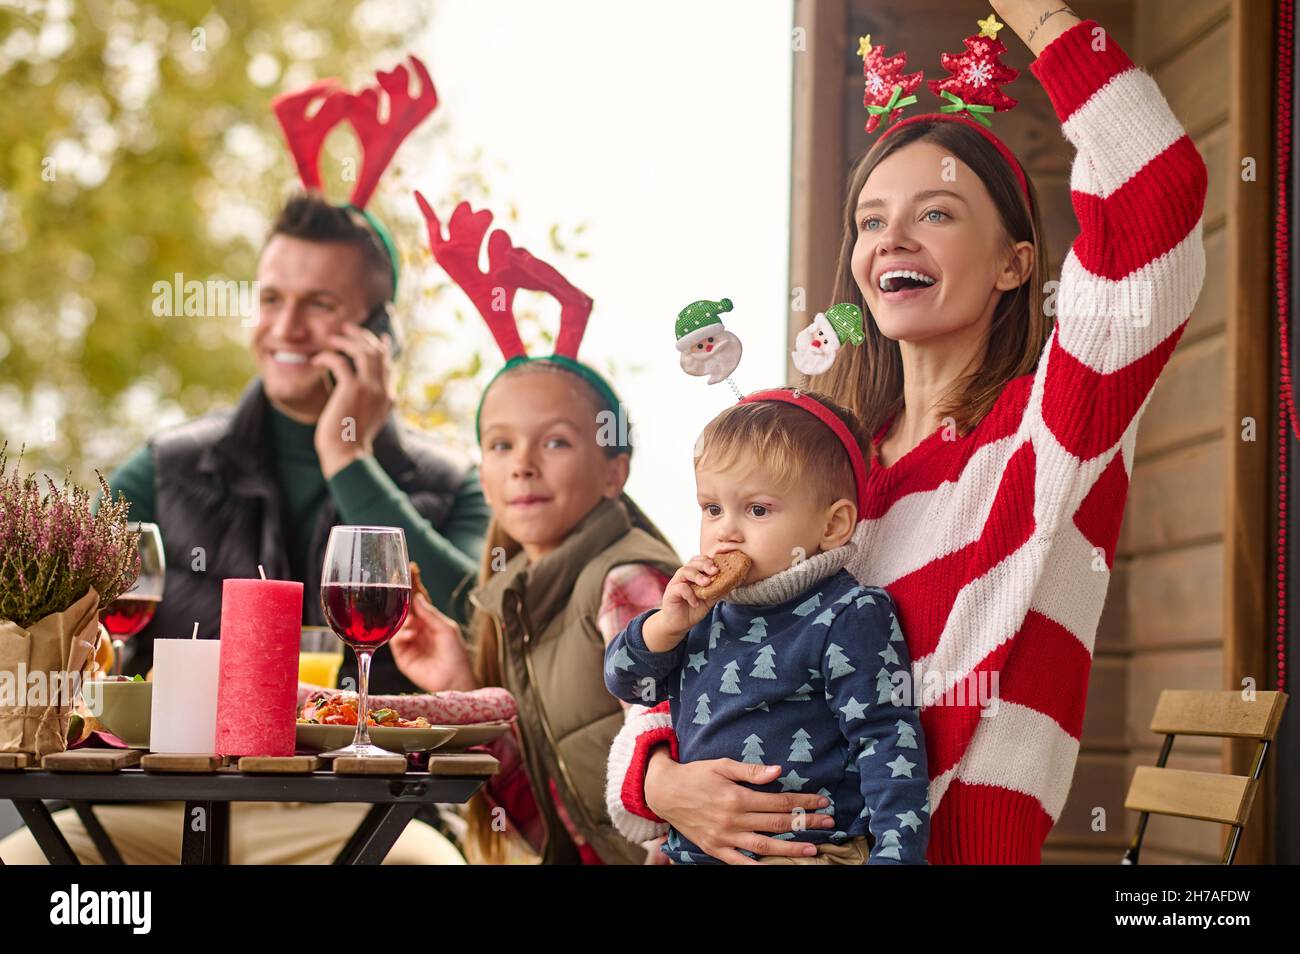 A happy family sitting at the table and celebrating christmas Stock Photo